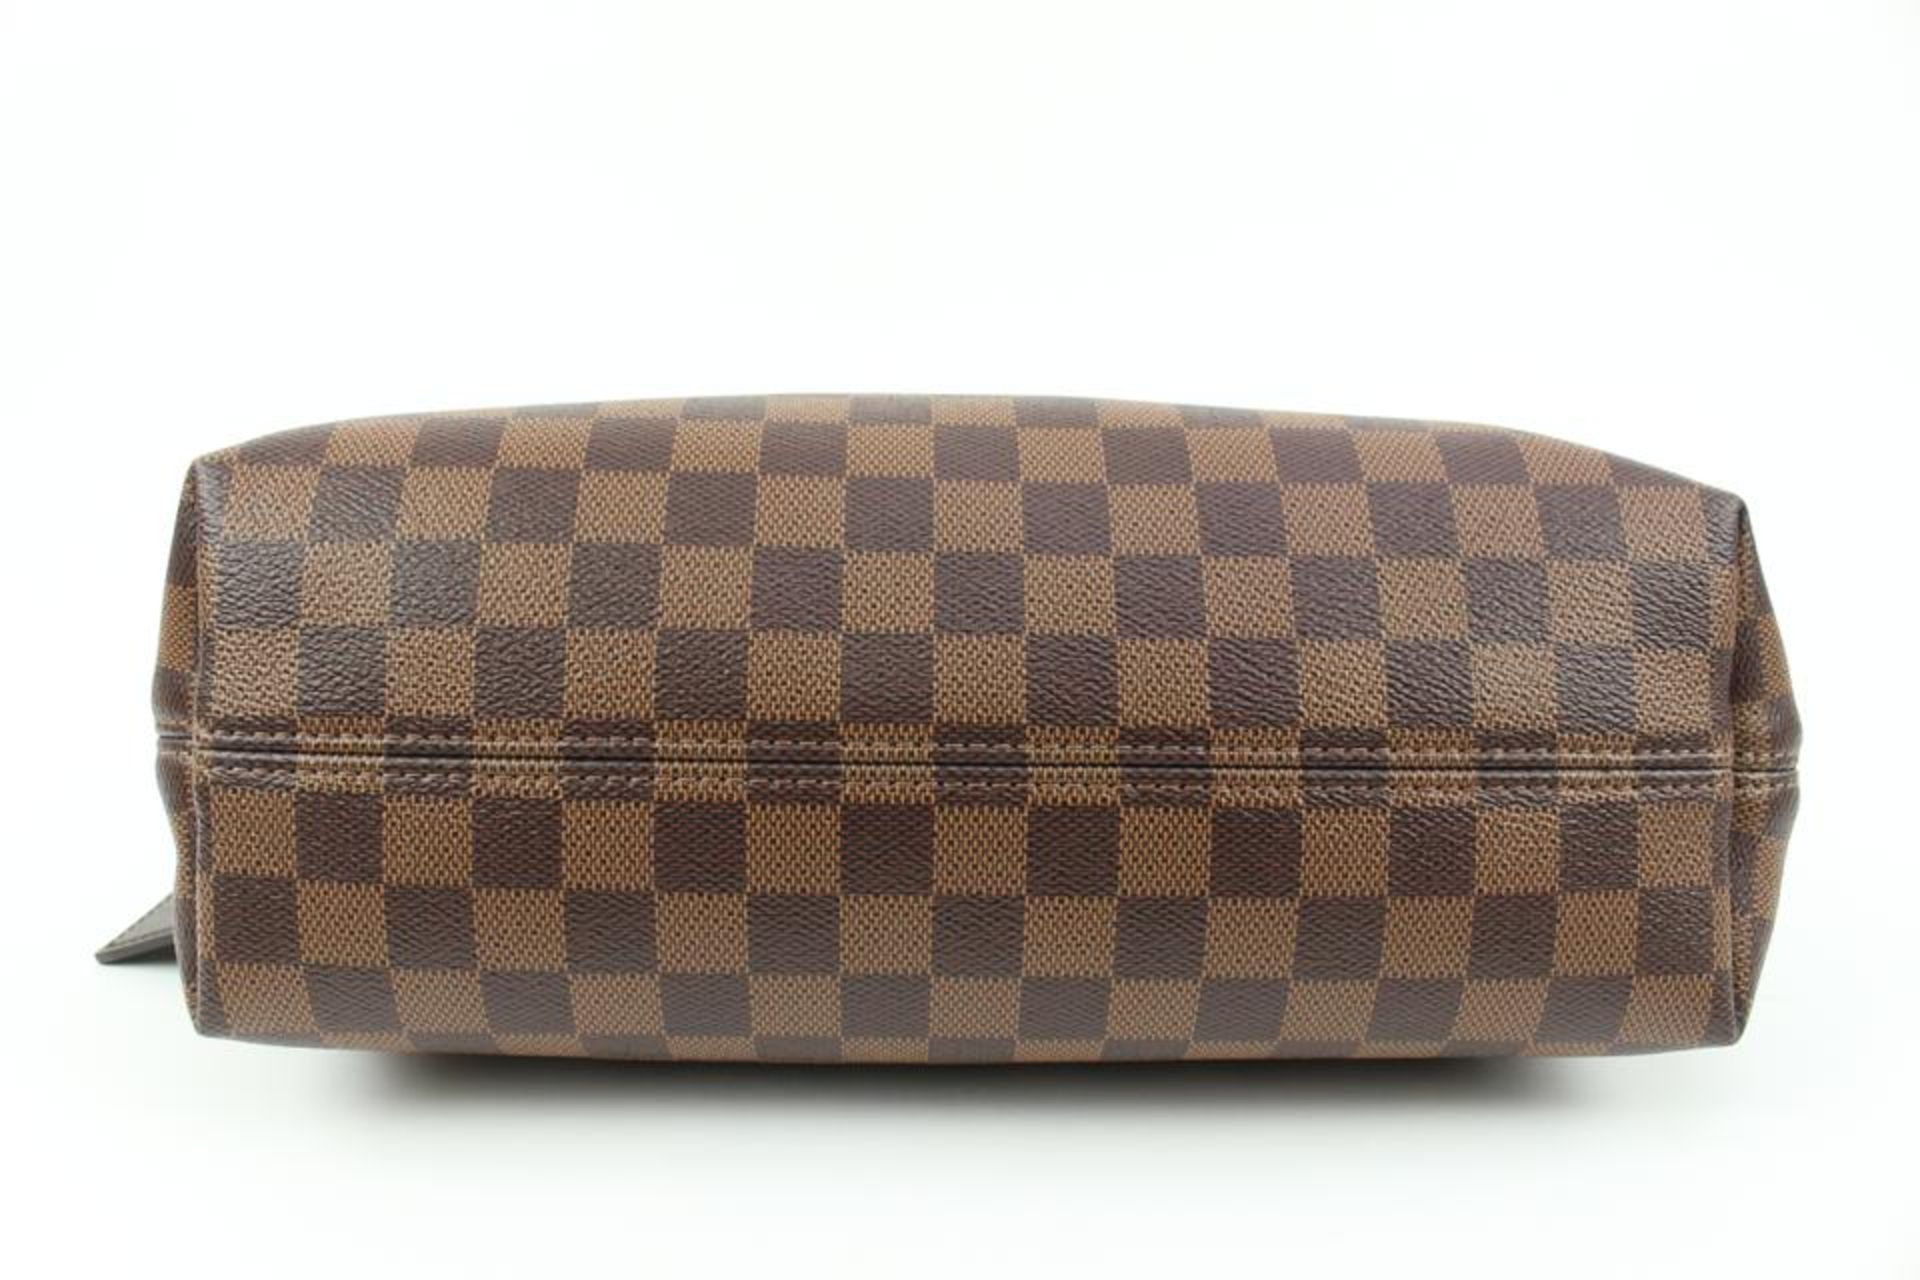 LOUIS VUITTON SOLD OUT EVERWHERE BRAND NEW DAMIER EBENE GRACEFUL PM HOBO - Image 9 of 15